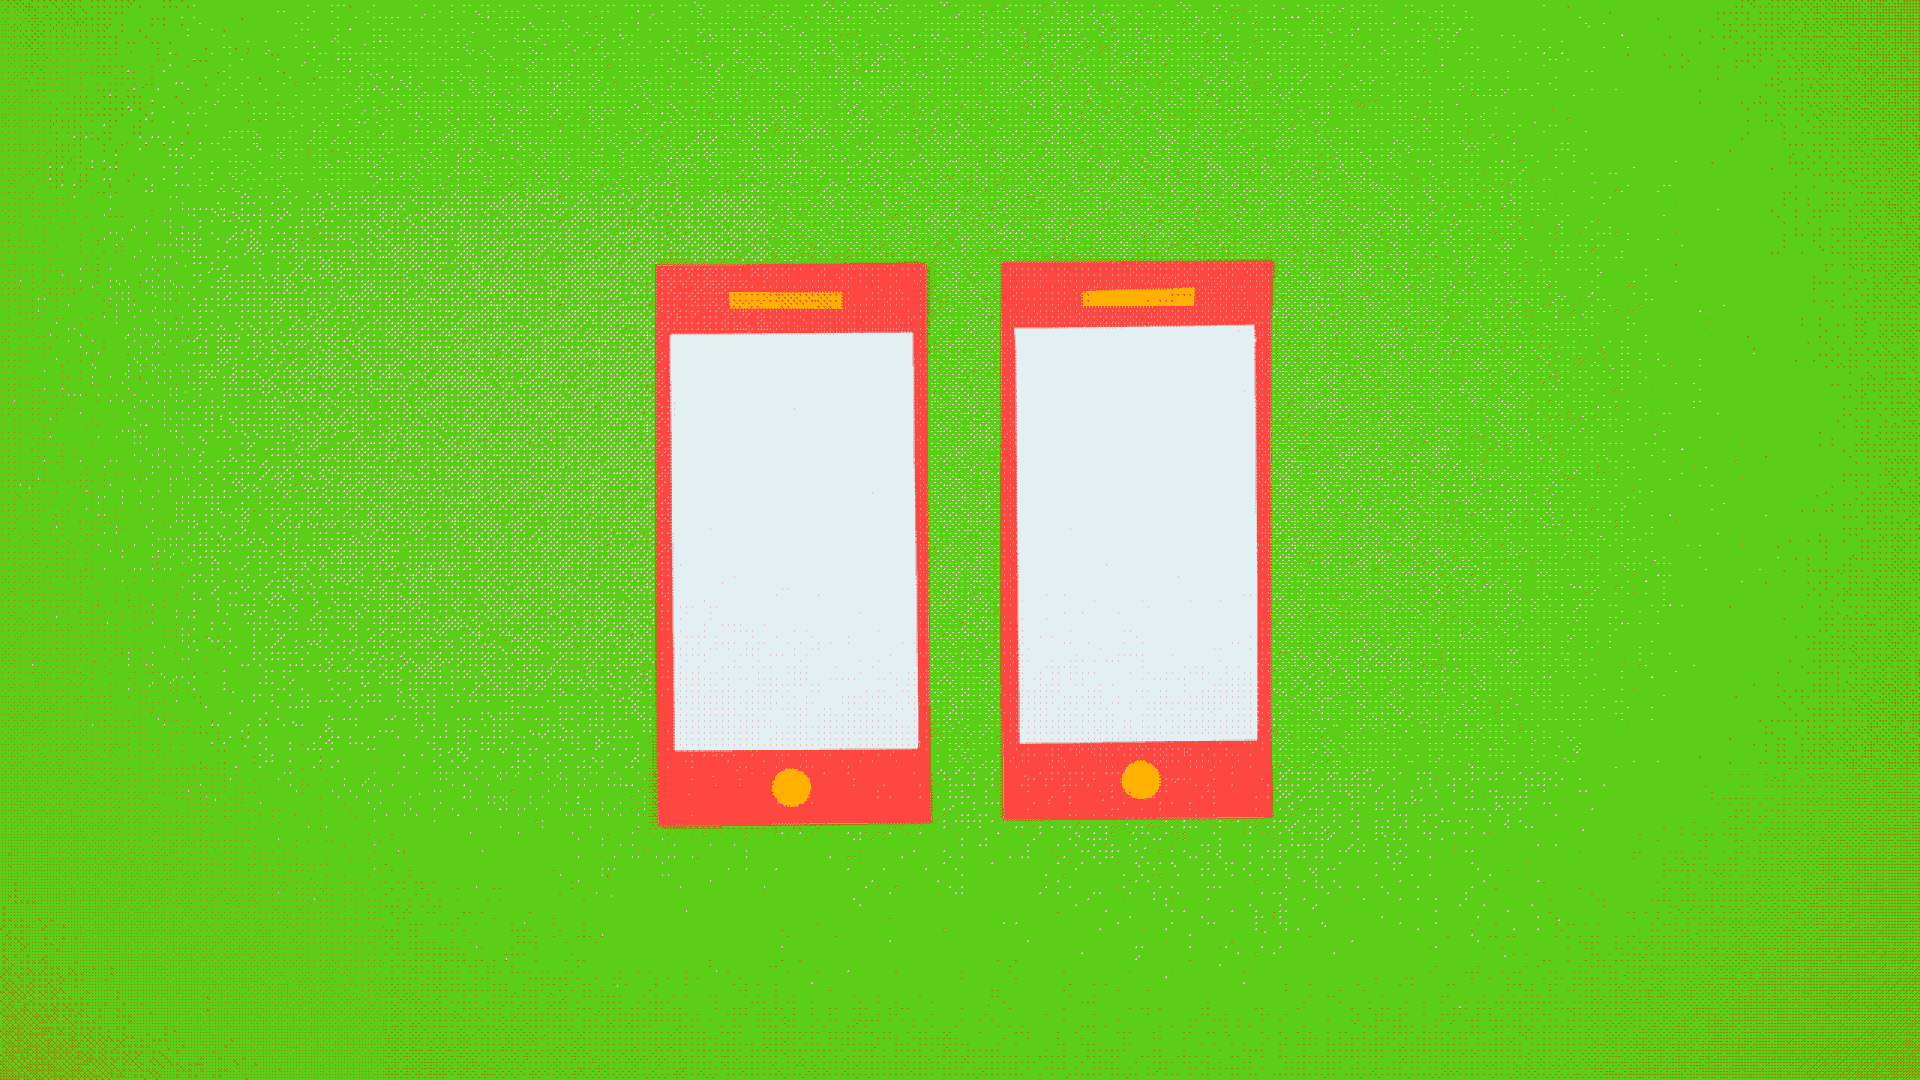 Illustration of two phones waxing and waning against a green field